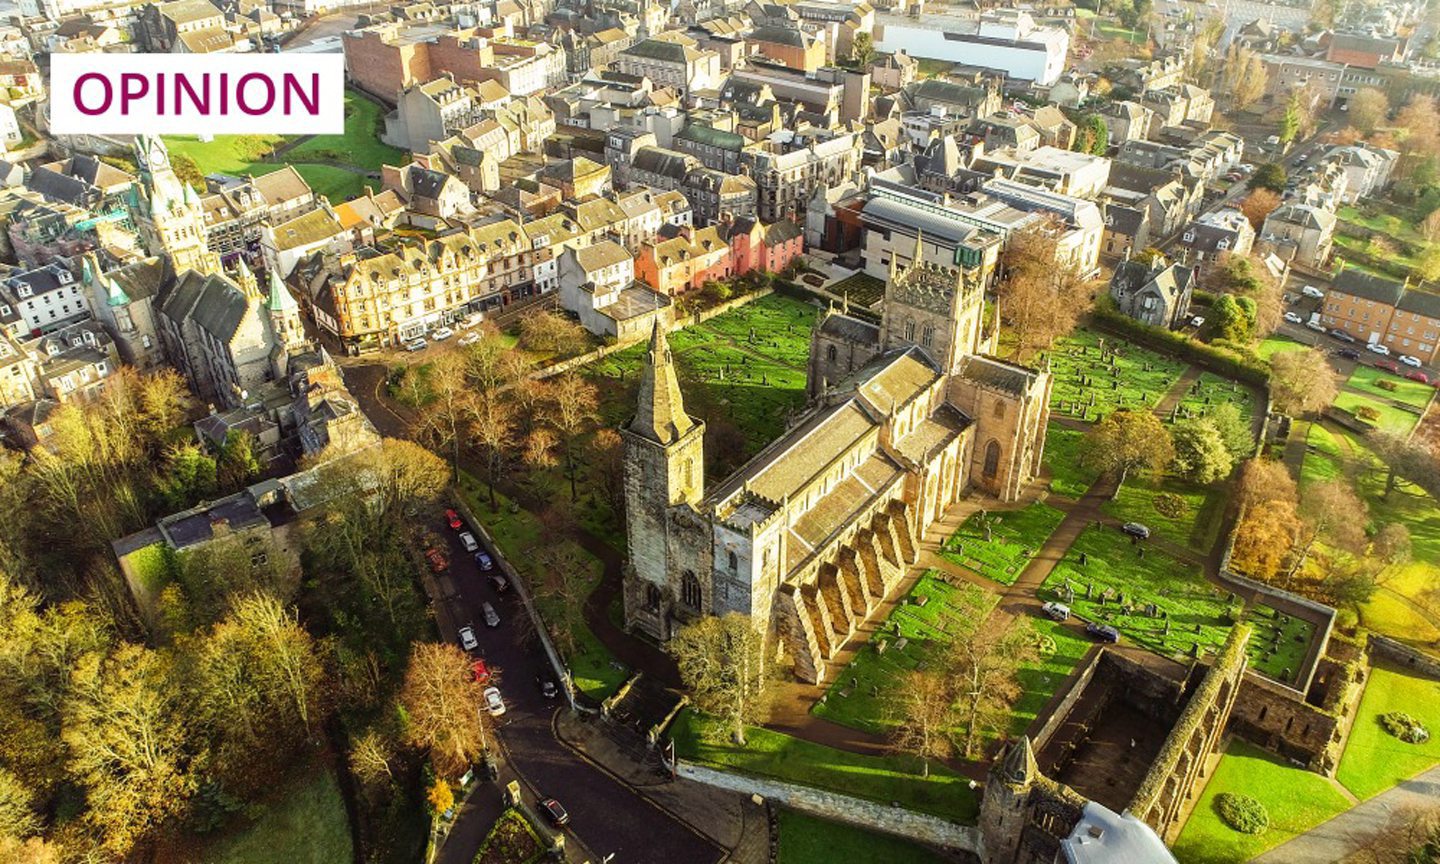 Dunfermline has been granted city status as part of the Platinum Jubilee.. Photo: Shutterstock.